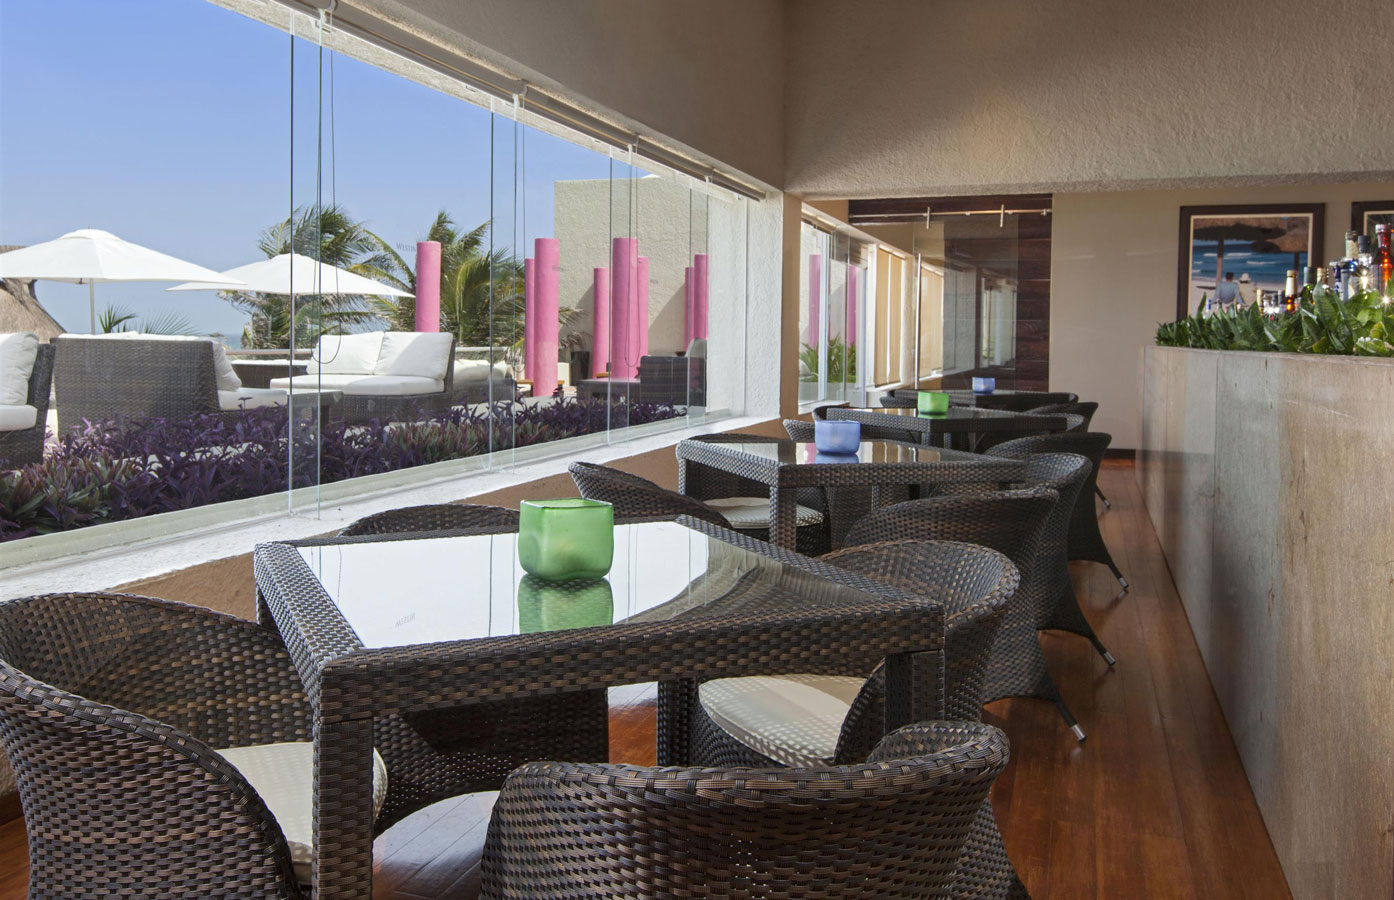 Hotel Project of The Westin Resort & Spa Cancun - Mexico with Artie Garden Outdoor Furniture Dining Chair and Table